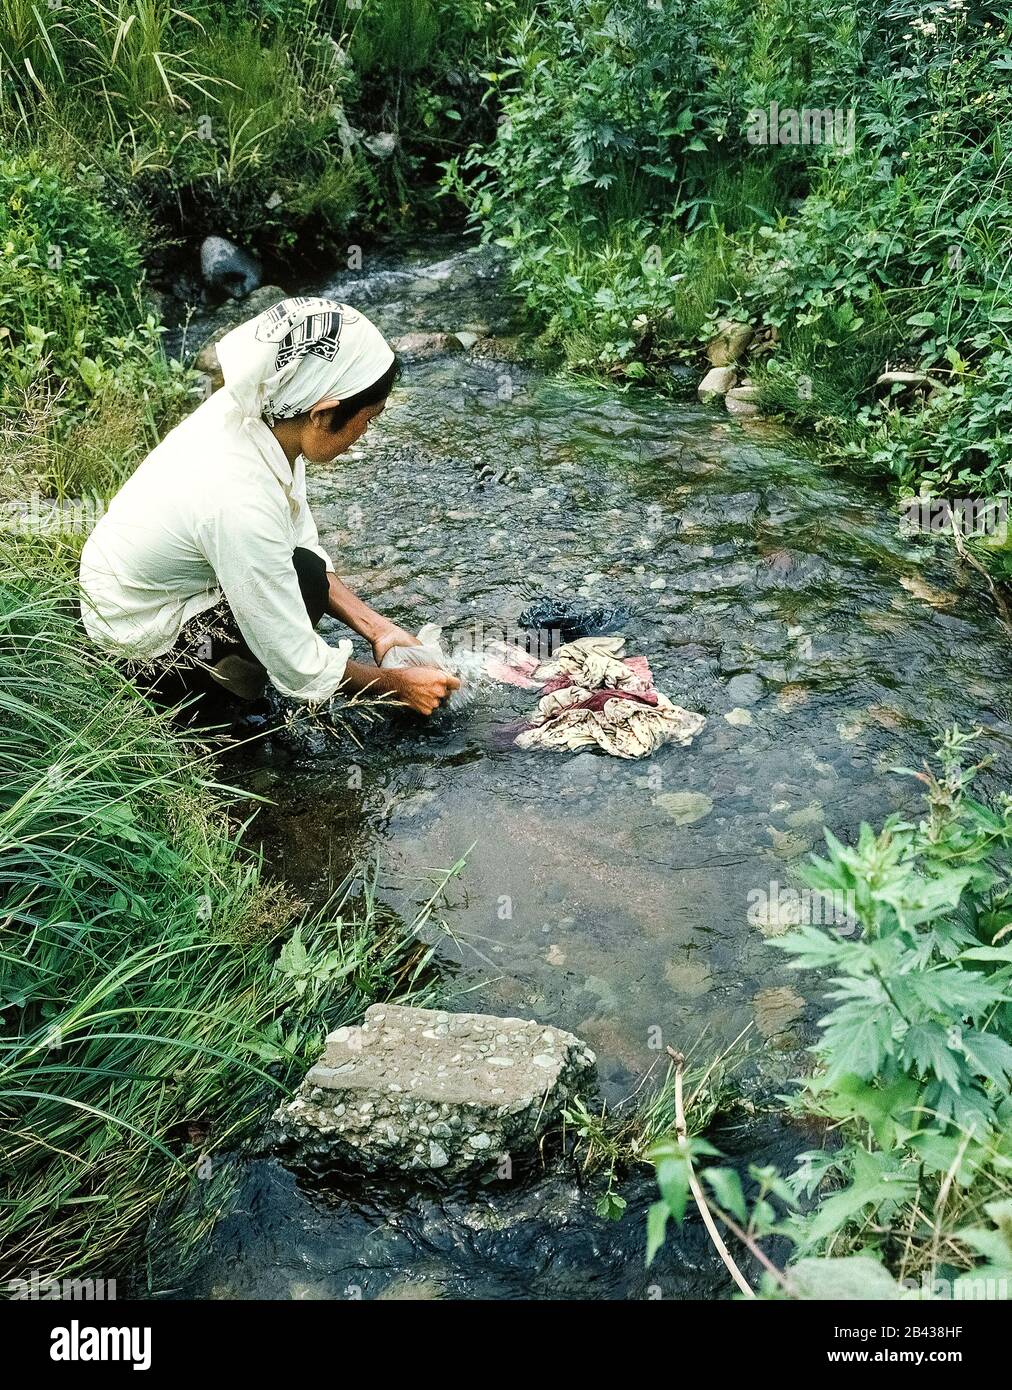 An Ainu woman washes clothes in a river stream near her native village on the island of Hokkaido in northern Japan. The daily chore depicts the older way of Ainu living when this historical photograph was taken in 1962. Since that time the Ainu (pronounced I-noo) have assimilated into Japanese society and their traditions can only be glimpsed today in special tourist villages. The Ainu were officially recognized as indigenous people of Japan in 2008. Stock Photo